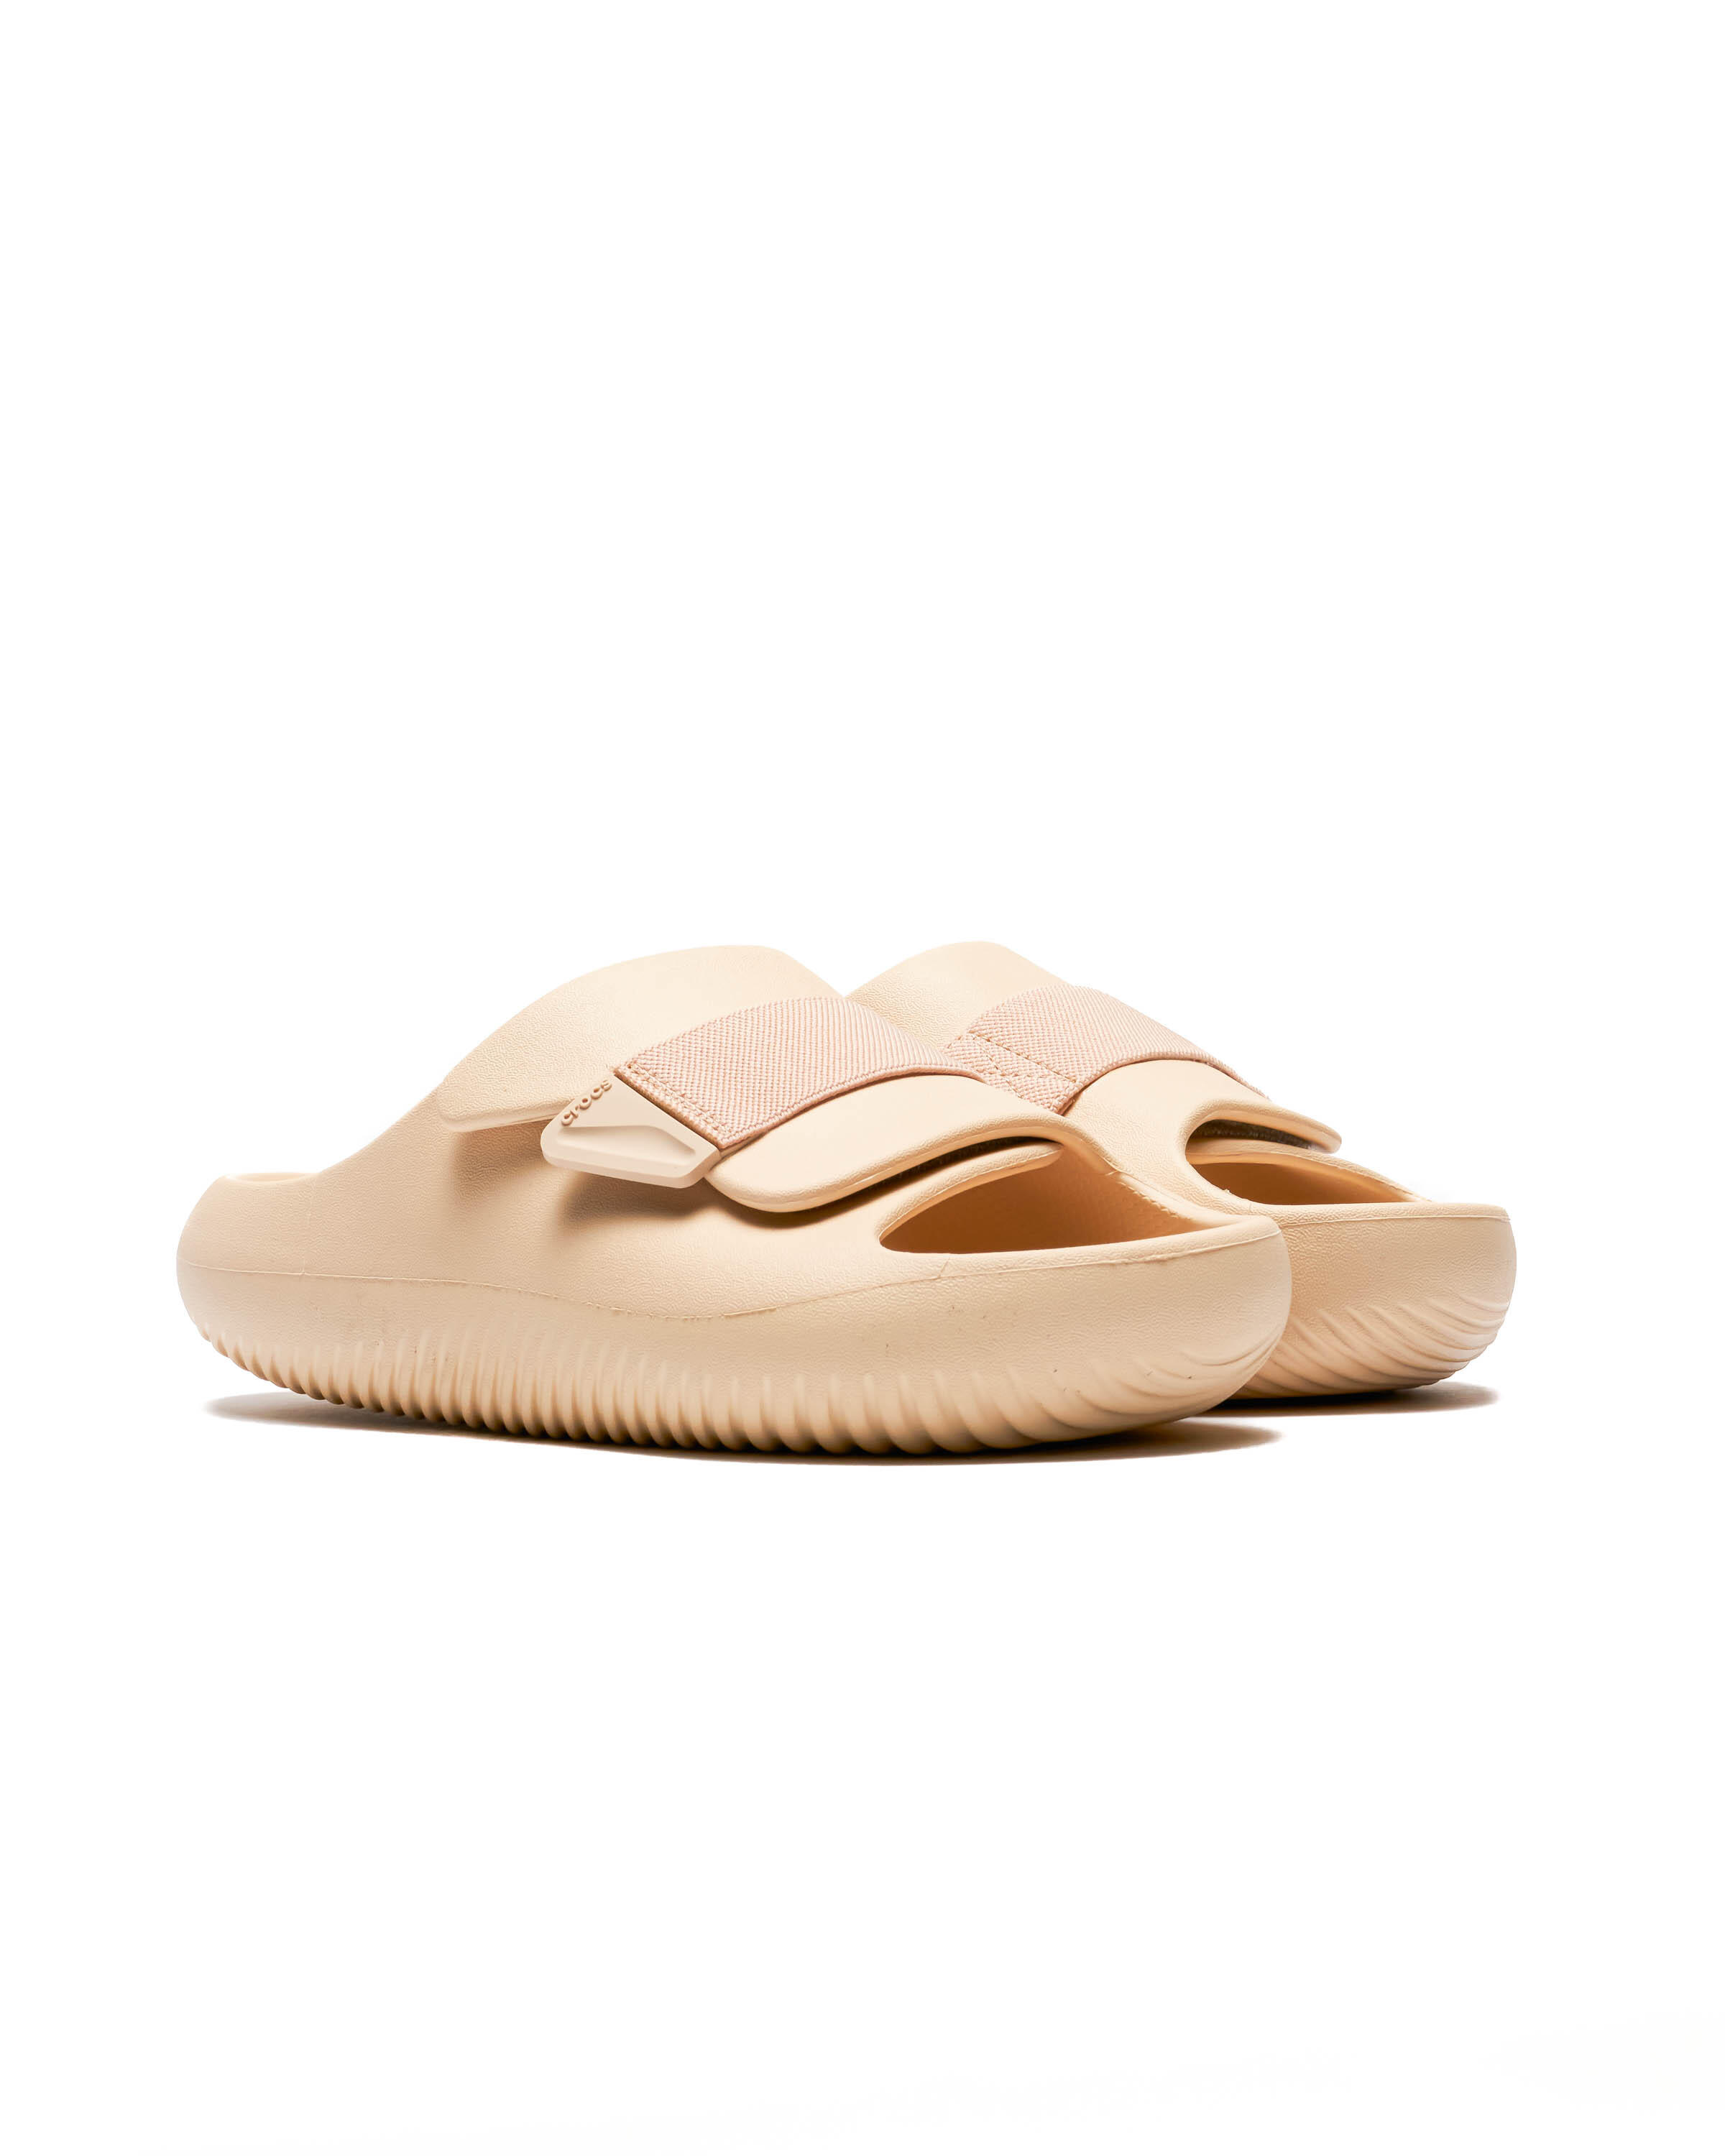 Crocs Mellow Luxe Recovery Slide